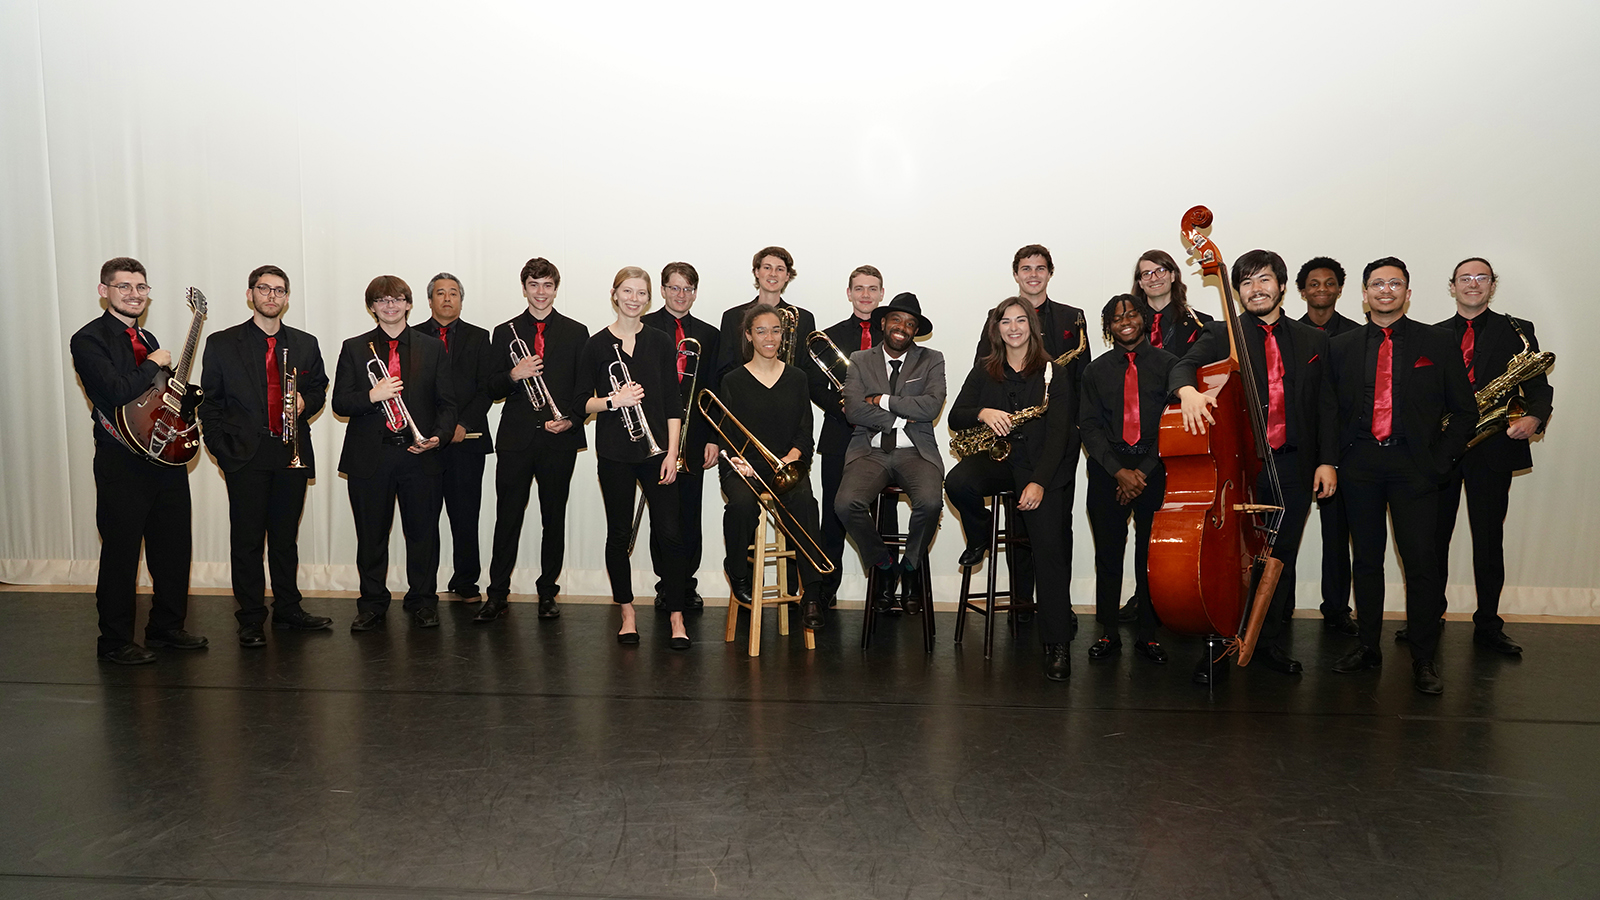 University of Maryland Jazz Students with their instruments.